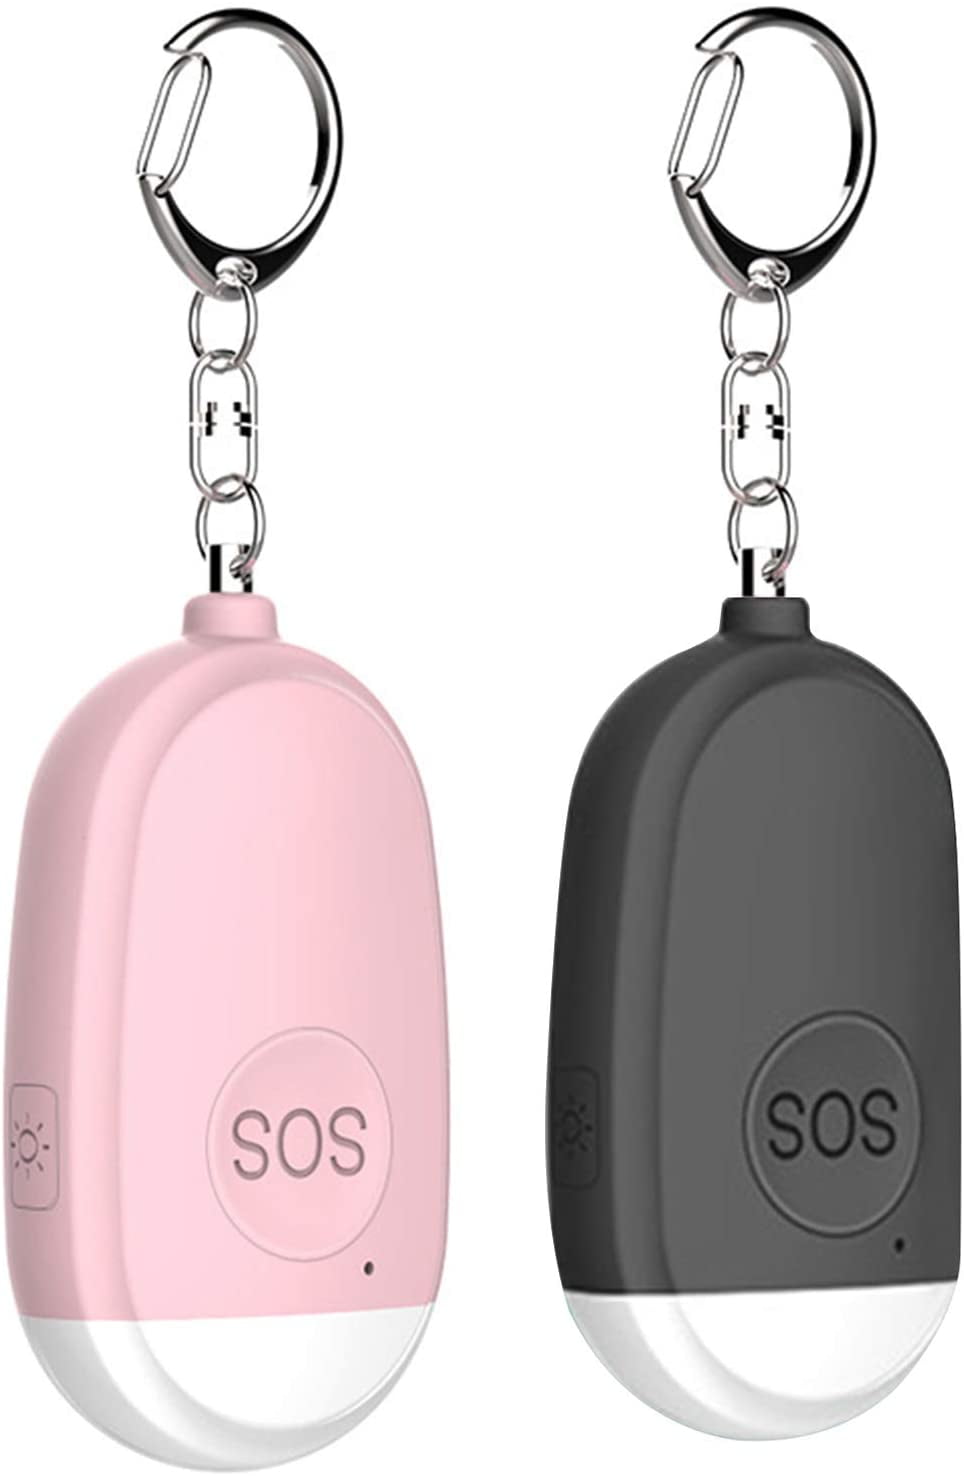 2 Pack, Rose Gold 130 dB Emergency Self Defense Personal Alarm Keychain with LED Light for Women MIBOTE Personal Alarm Kids Students Elderly